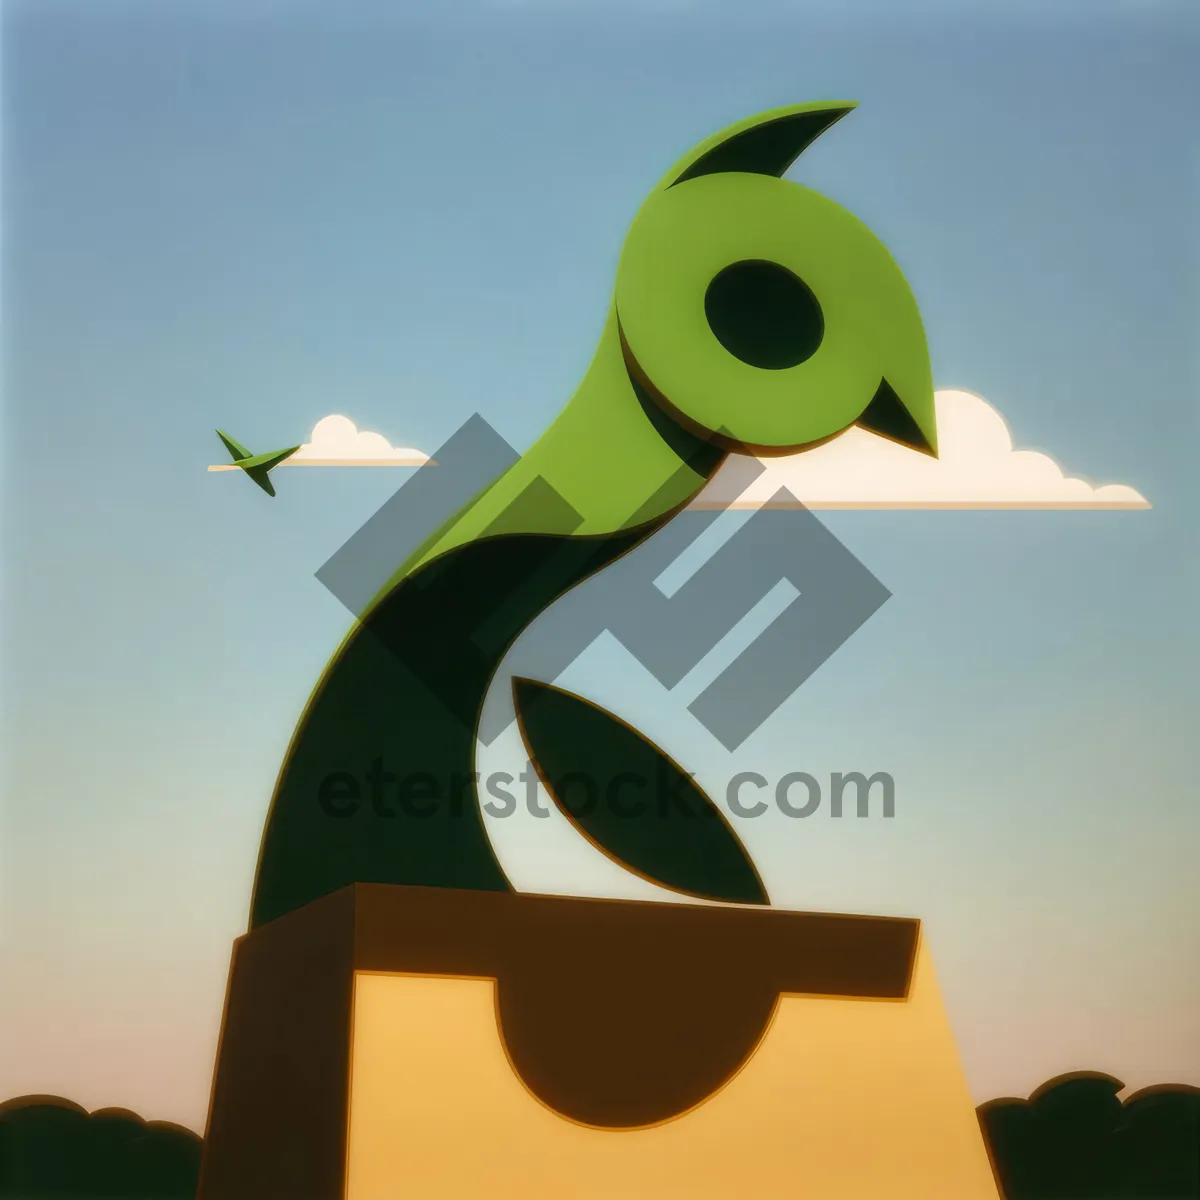 Picture of Whimsical lookout symbol in cartoon design